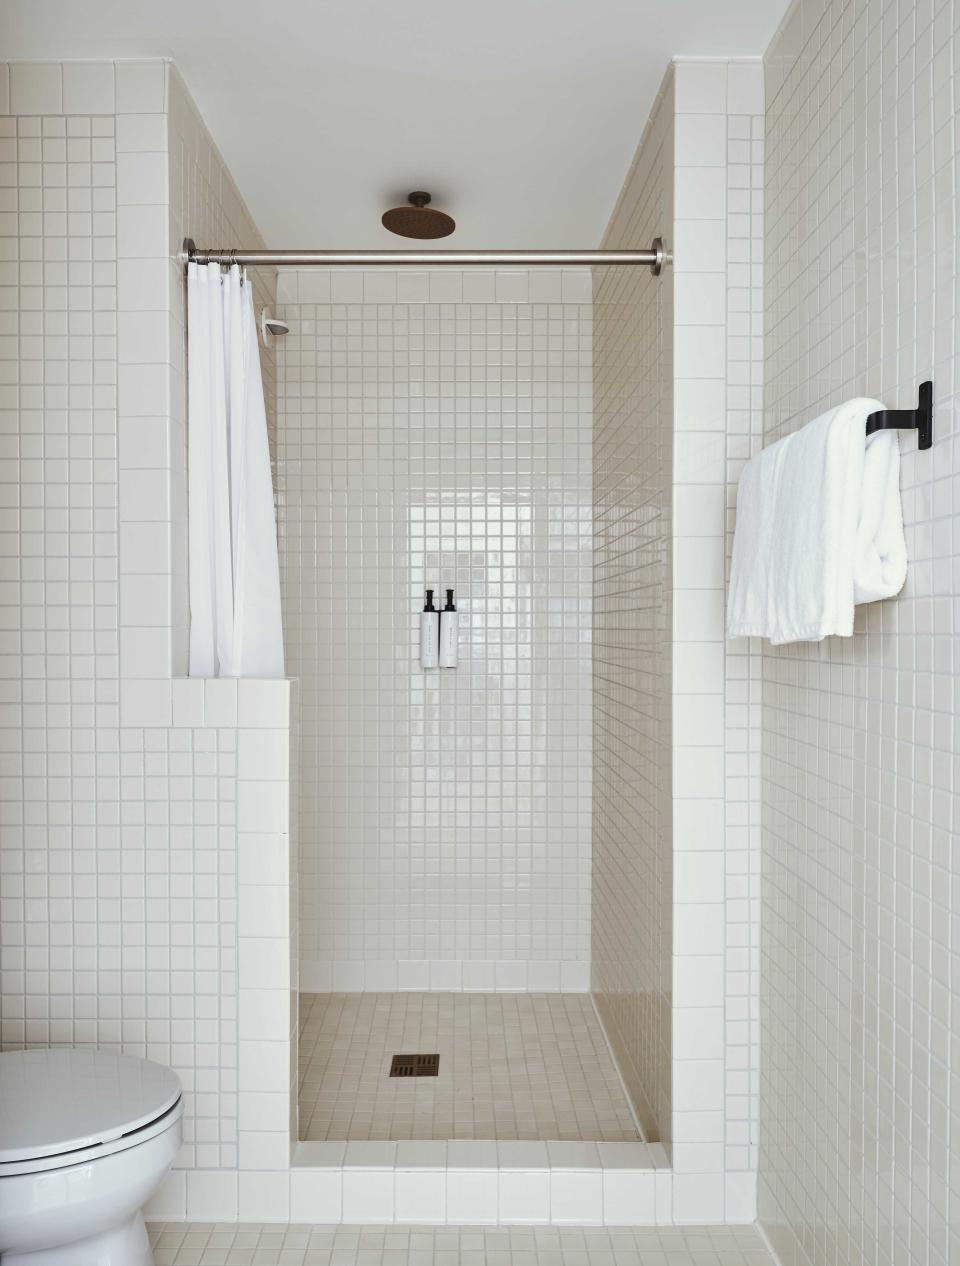 Tile covers the bathroom's surfaces.